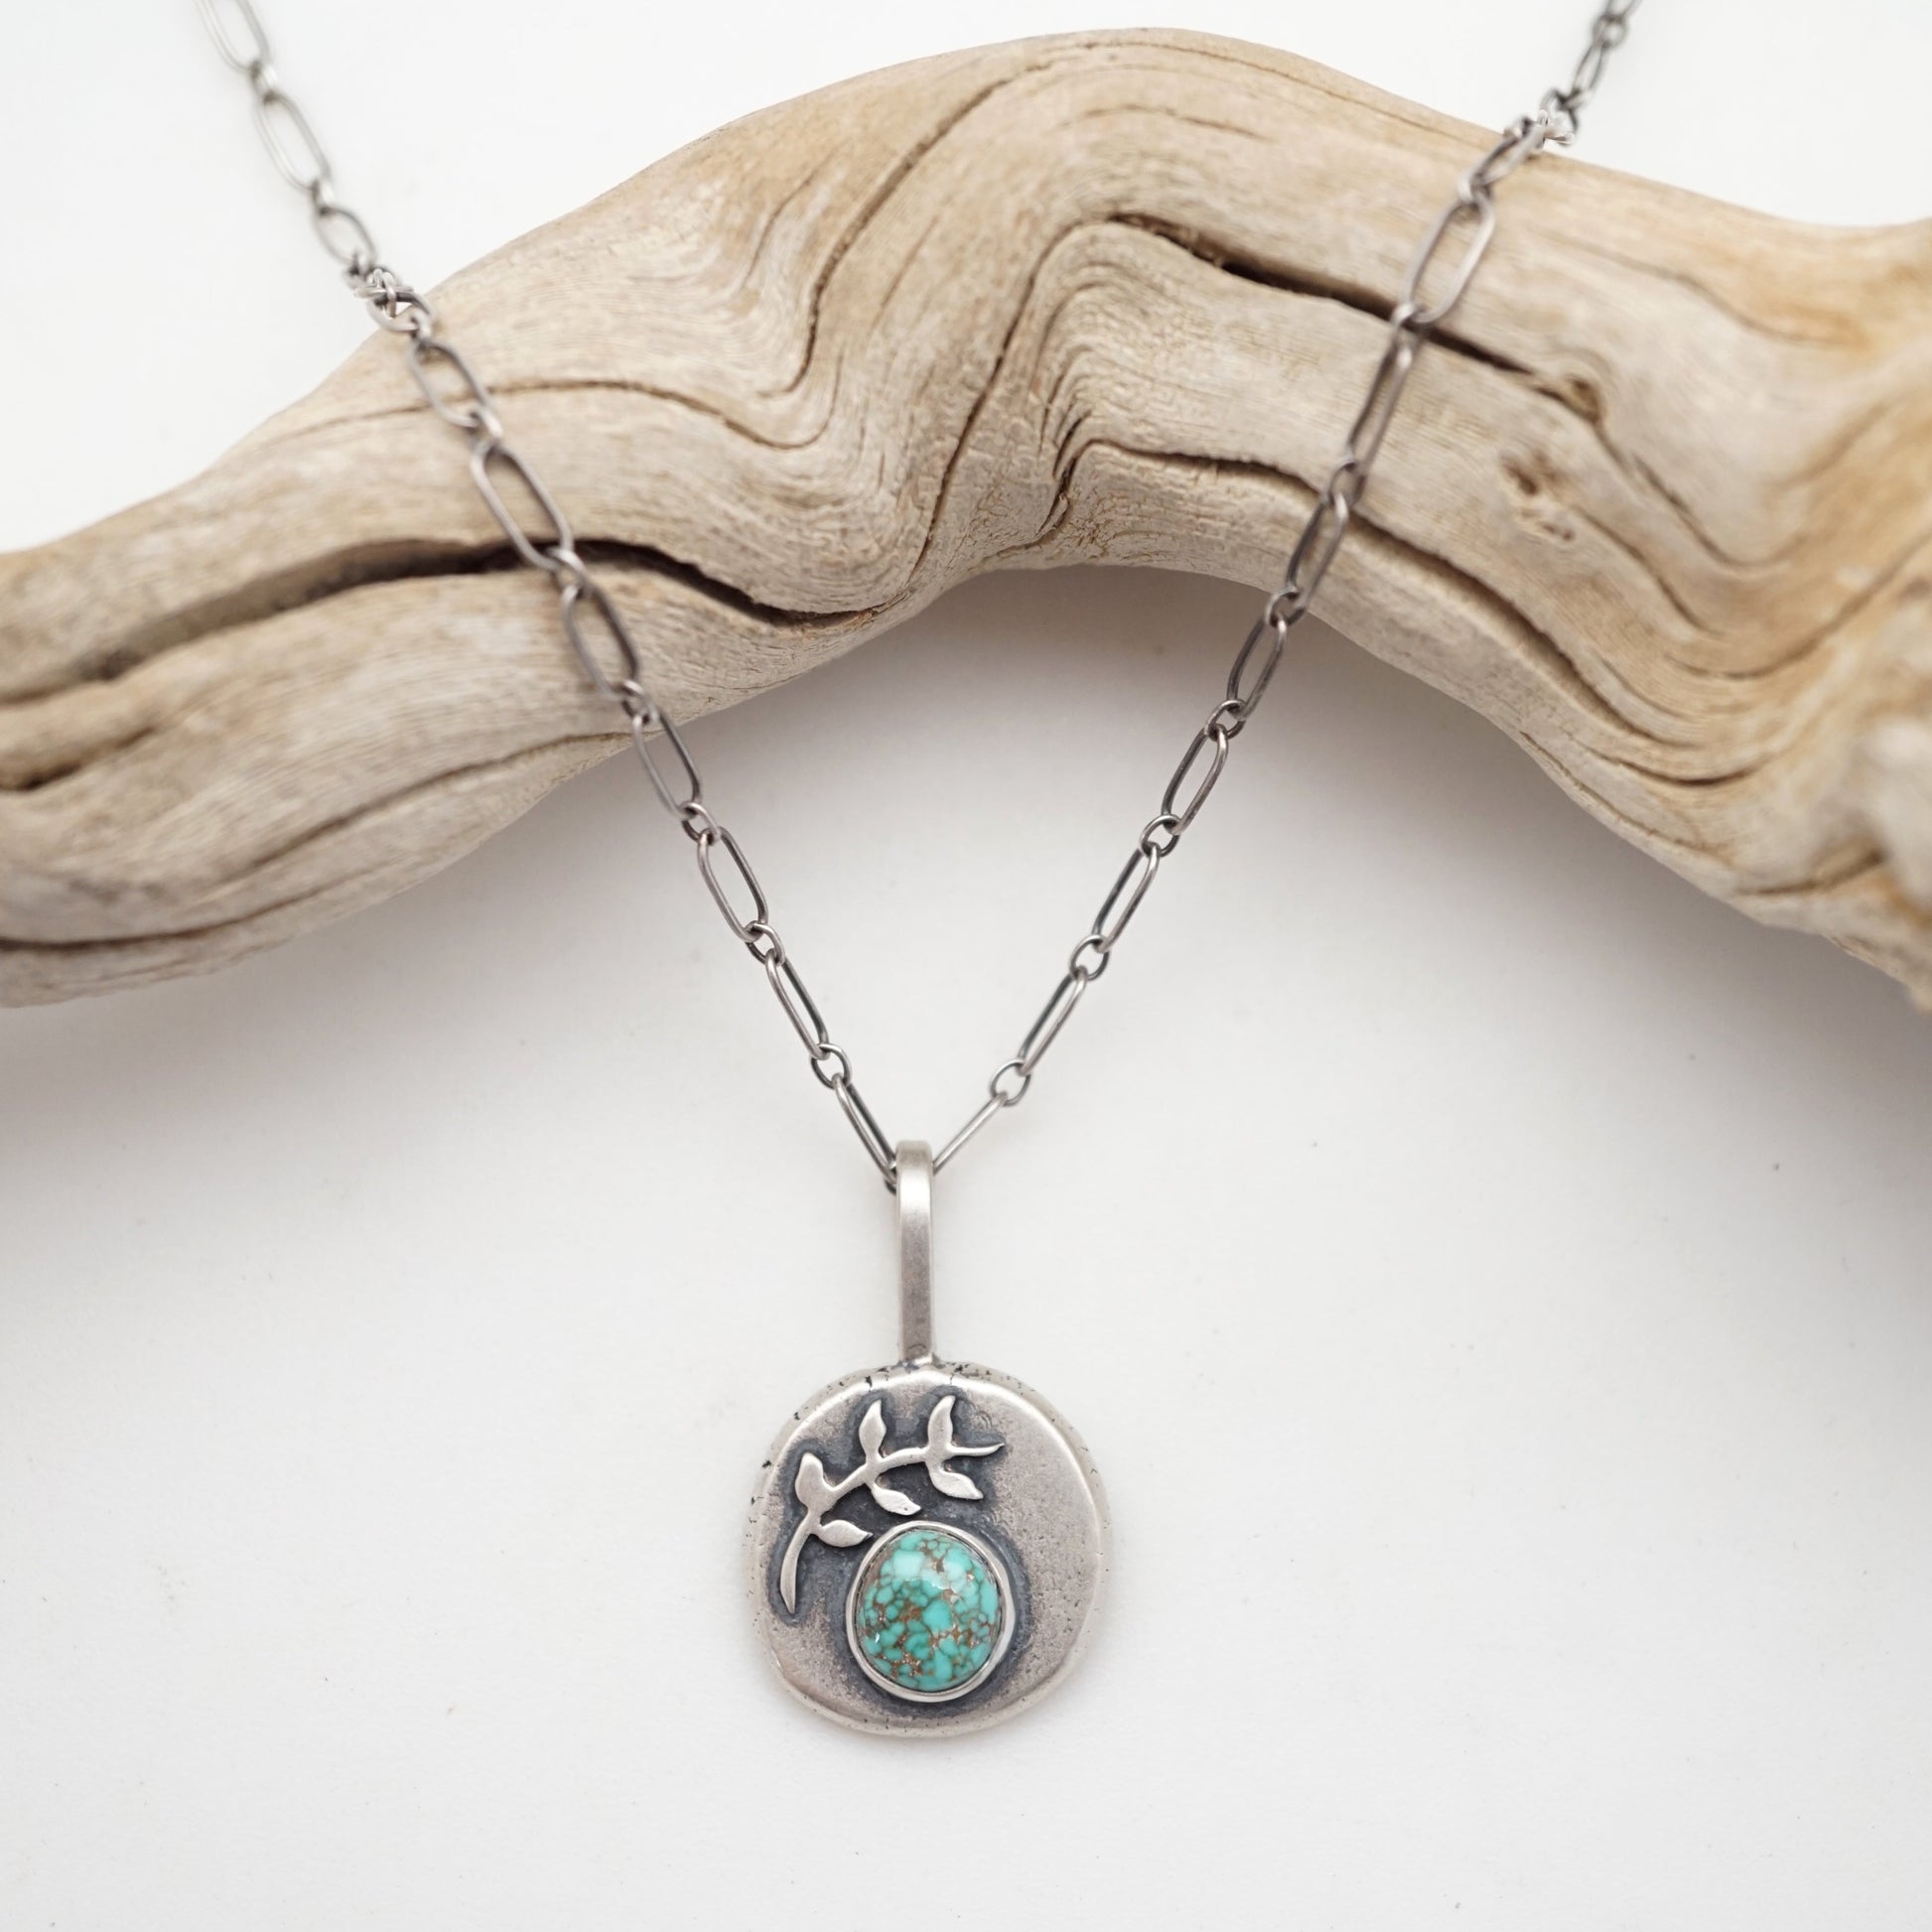 carico lake turquoise pebble necklace with silver leaves #2 - Lumenrose